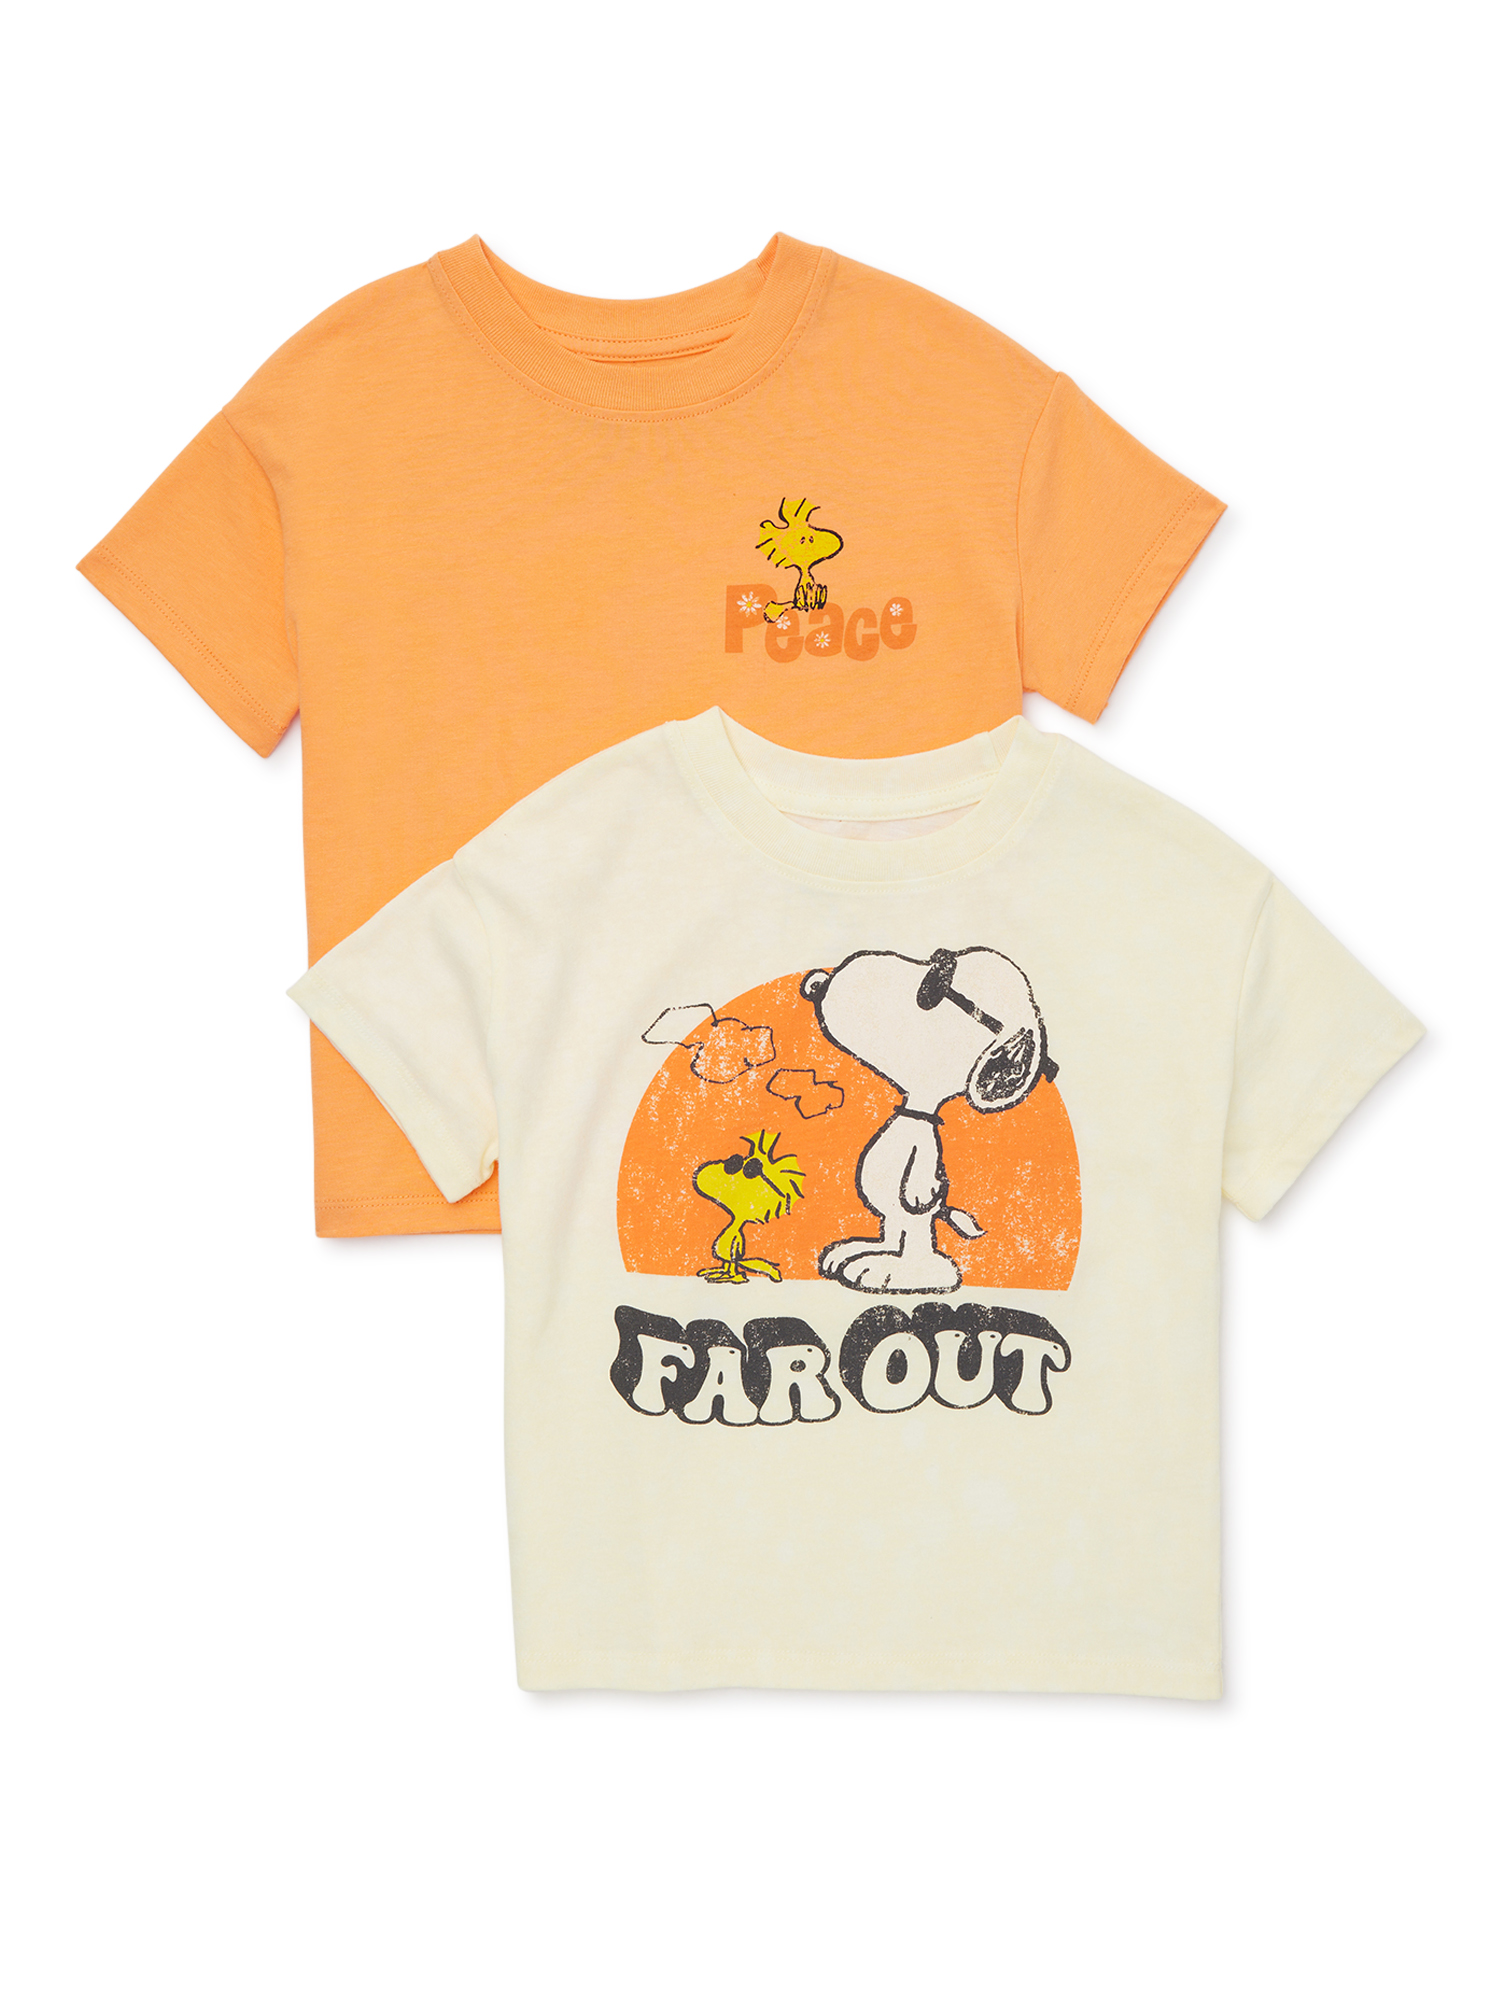 Peanuts Snoopy Toddler Boy Graphic Tees, 2-Pack, Sizes 2T-5T - image 1 of 8